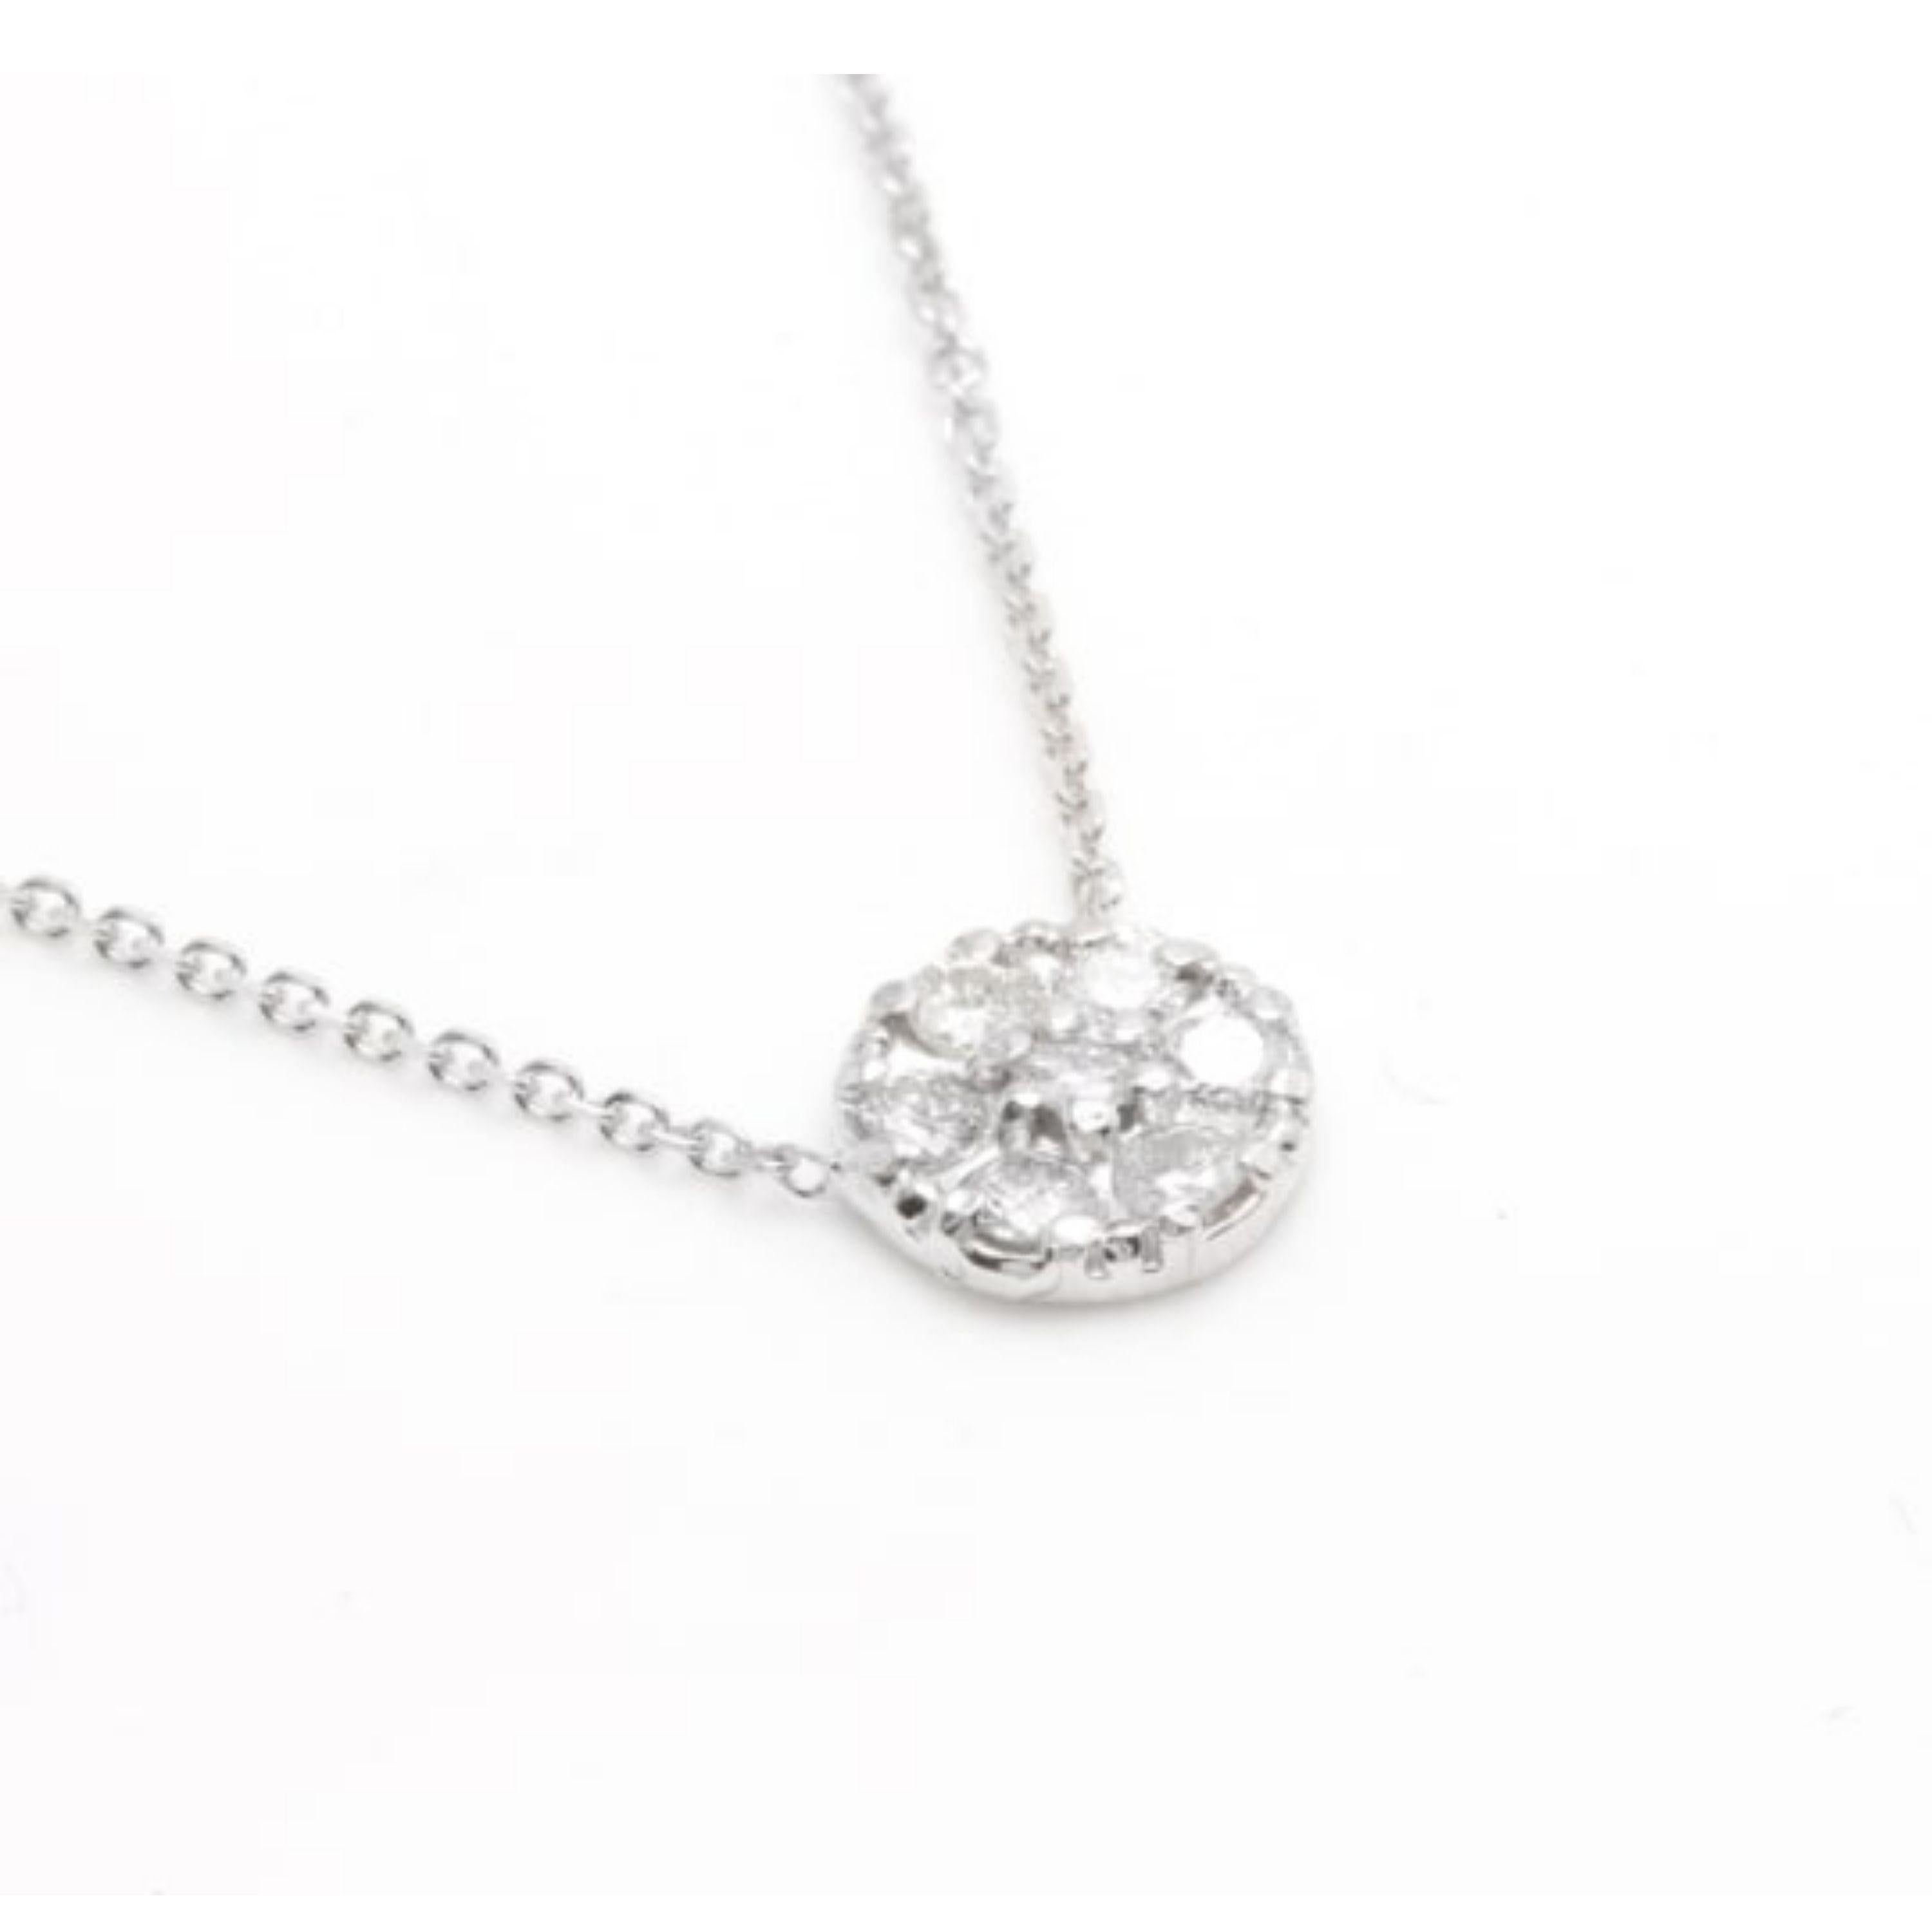 0.35Ct Natural Diamond 14K Solid White Gold Necklace Pendant

Amazing looking piece!

Stamped: 14K

Total Natural Round Diamond weights: 0.35 Carats (H / SI1-SI2)

Total Chain Length is 16 inches

Pendant Diameter Approx. 8.30mm

Total item weight